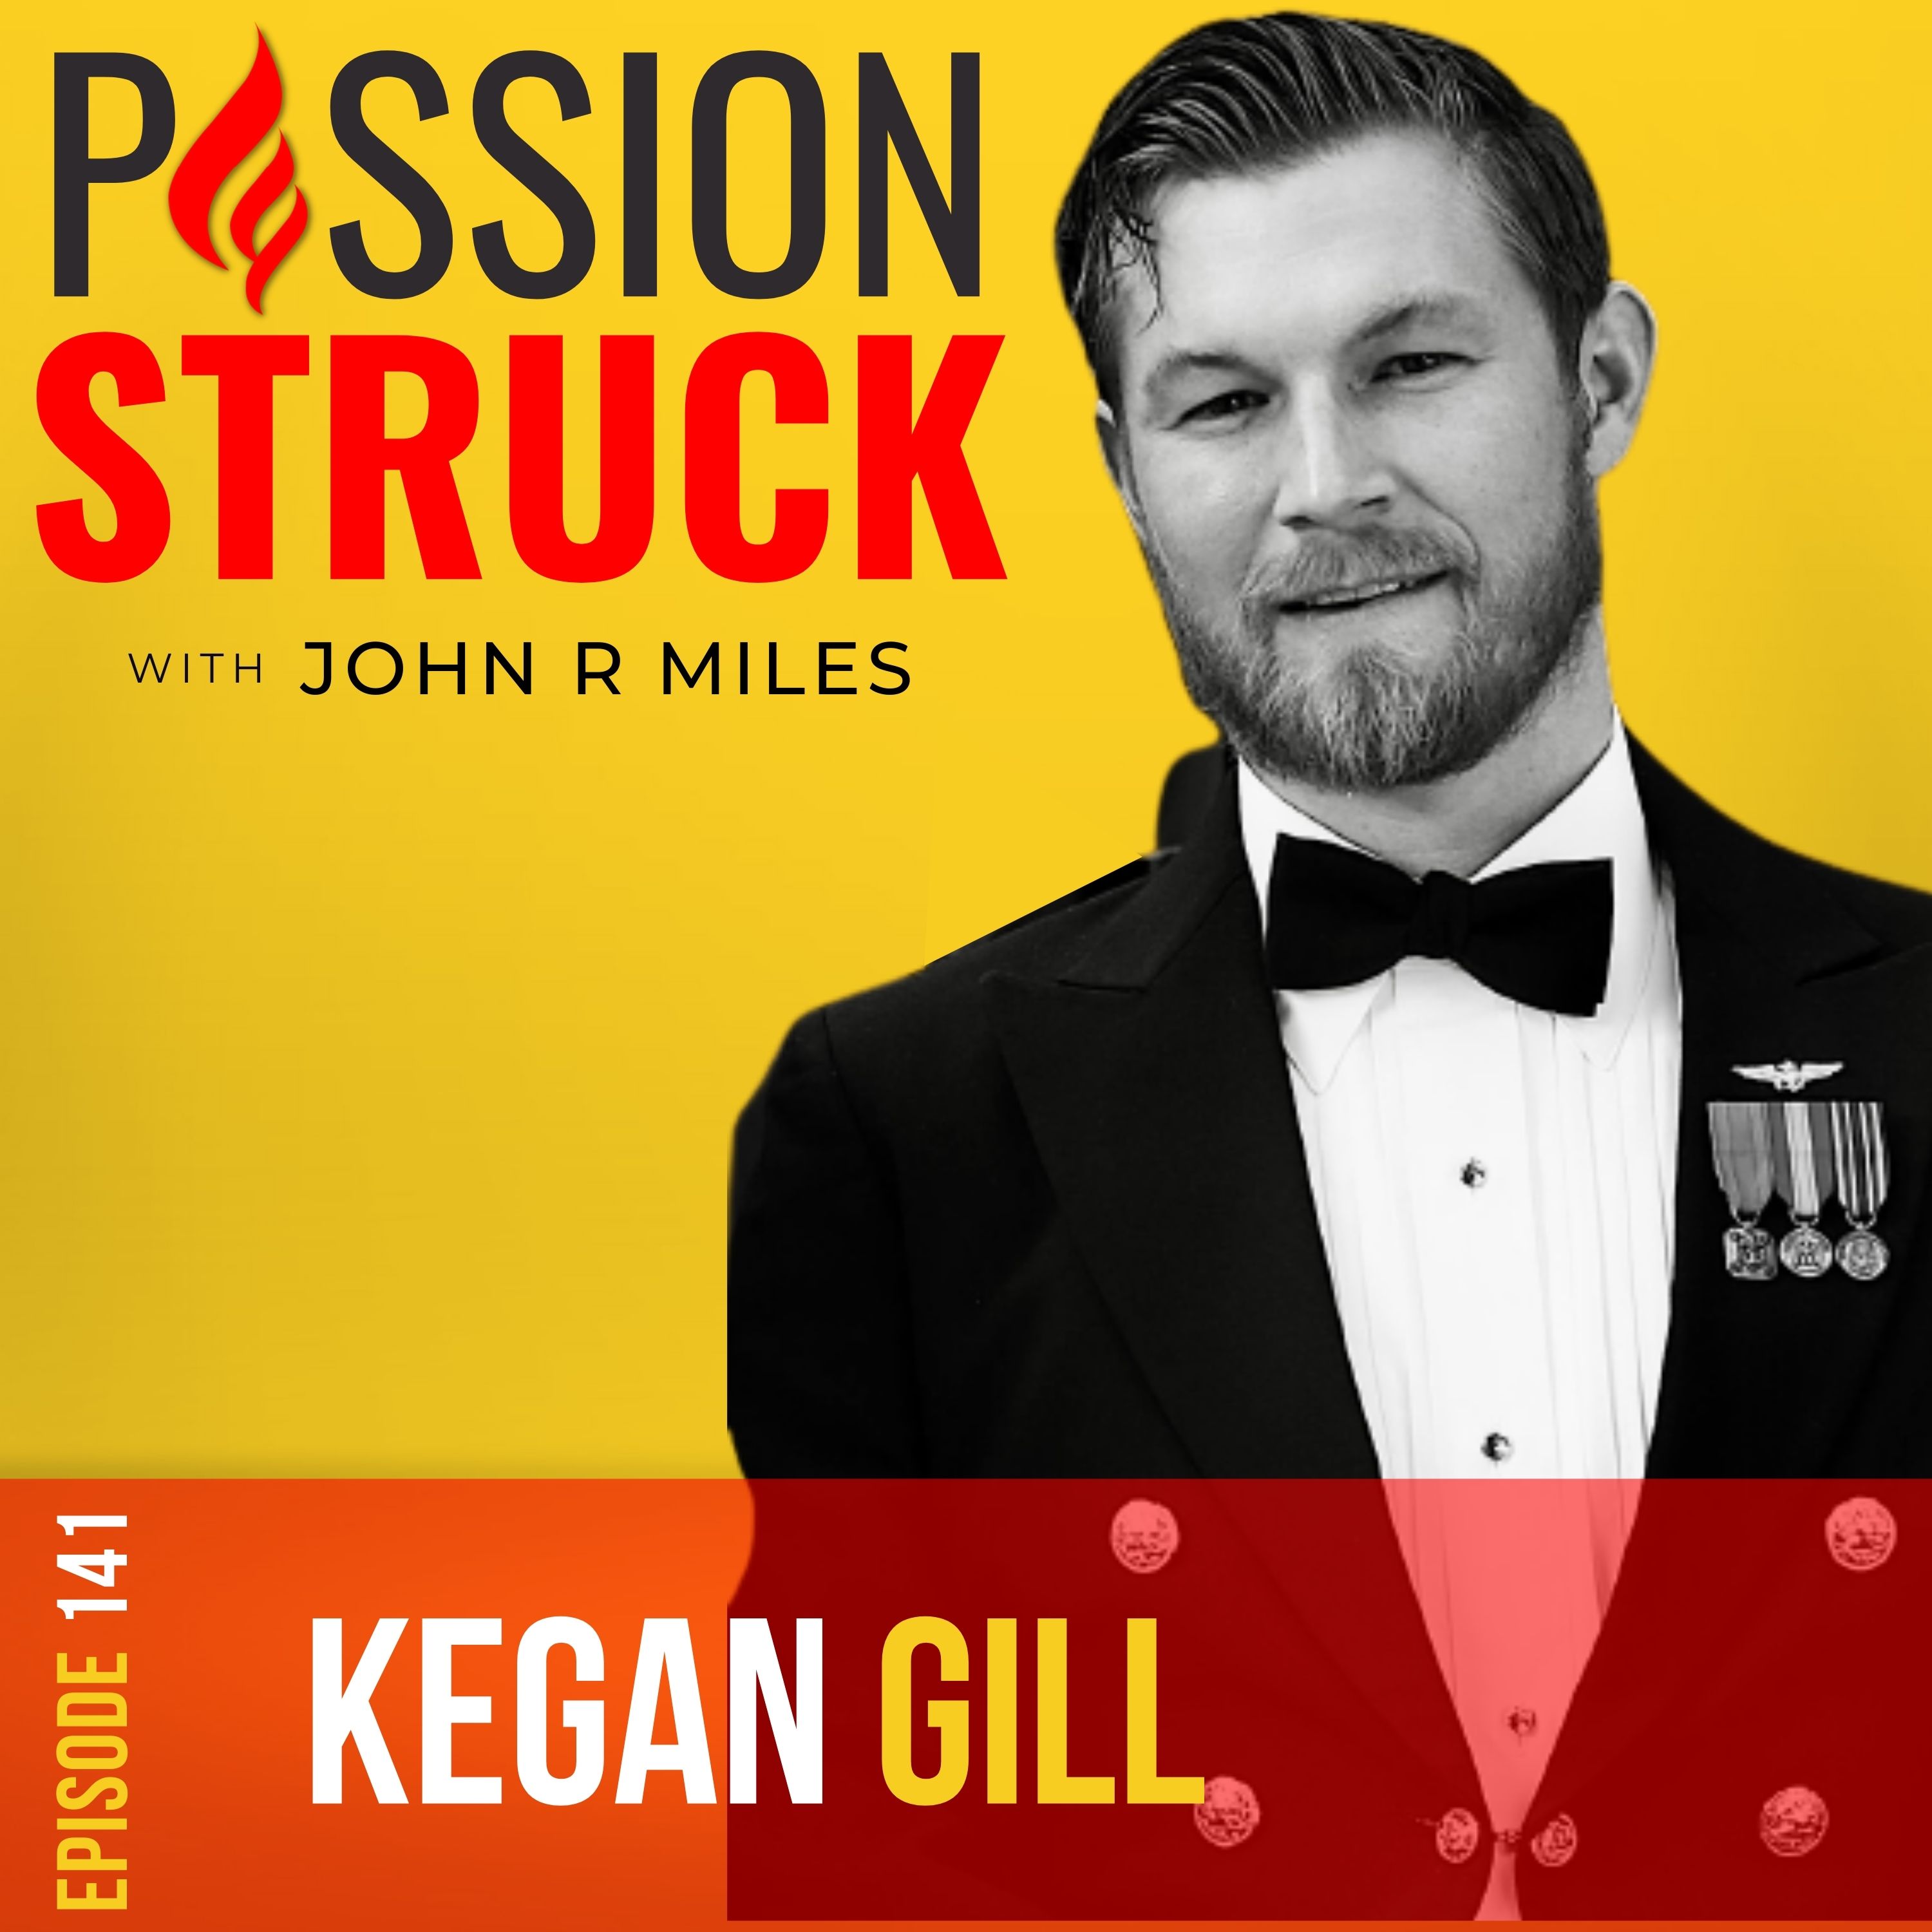 Passion Struck with John R. Miles album cover for episode 141 with F-18 Pilot Kegan Gill